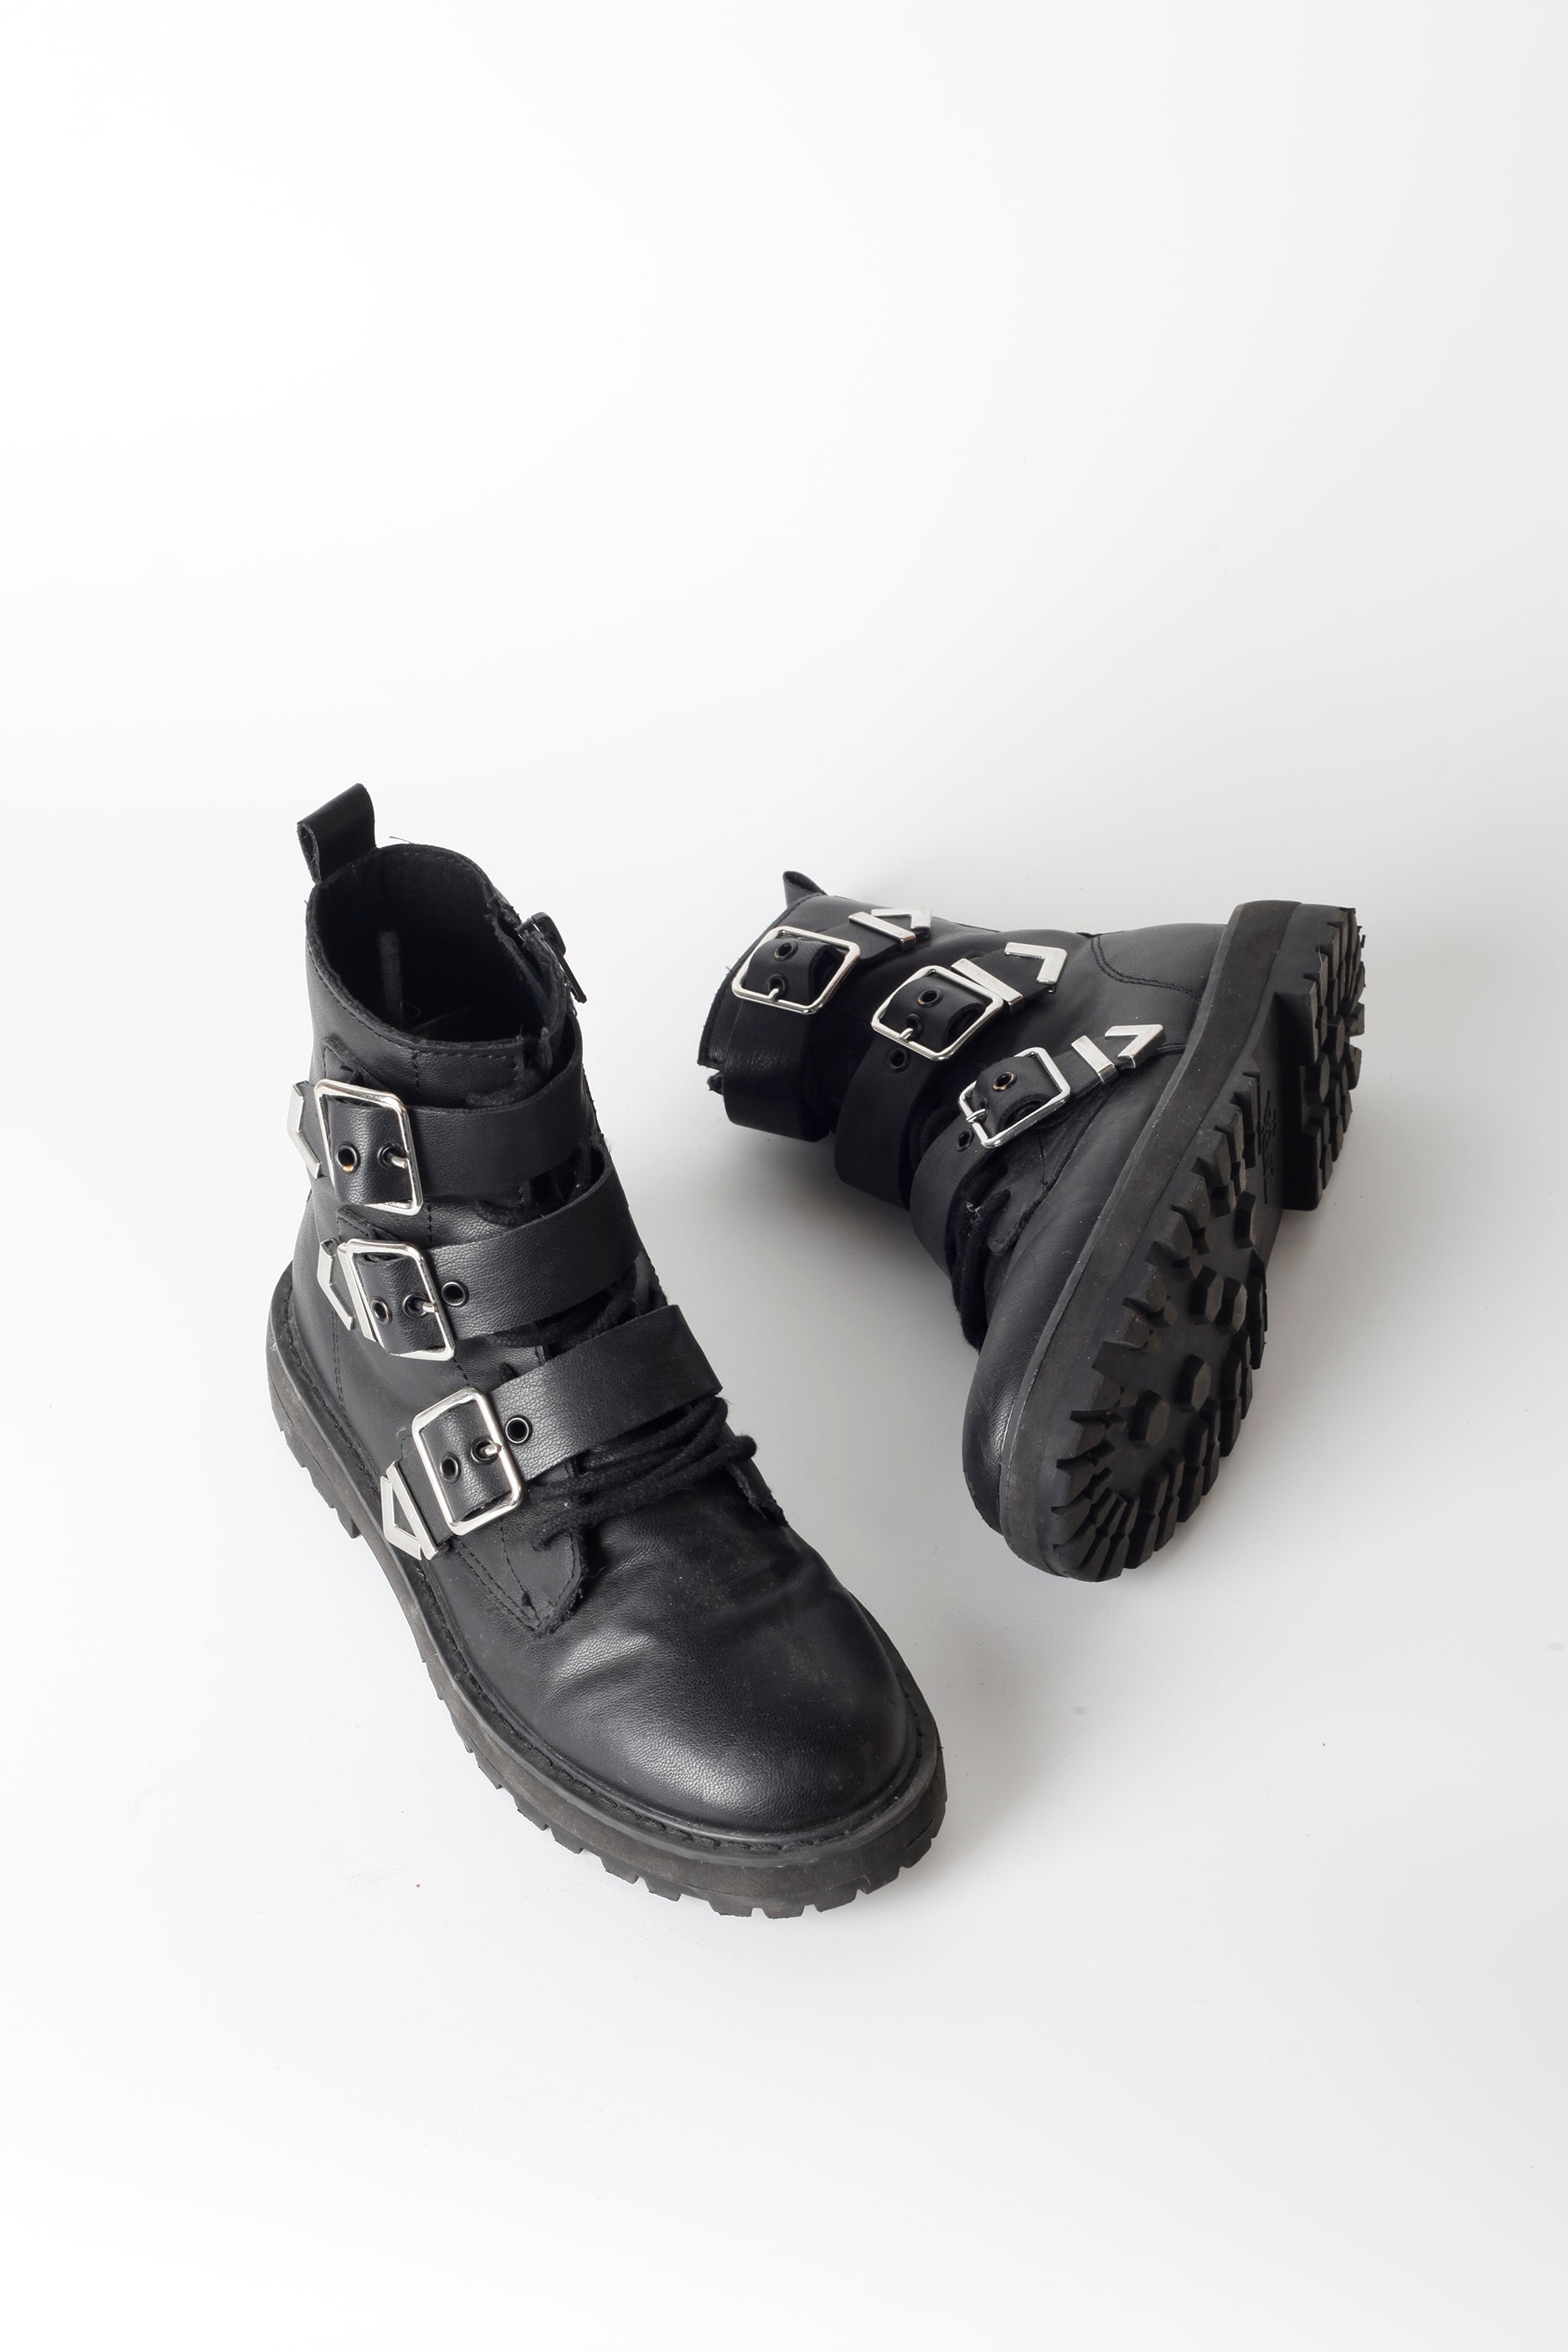 Girls Black Leather Biker Boots with Silver Buckles